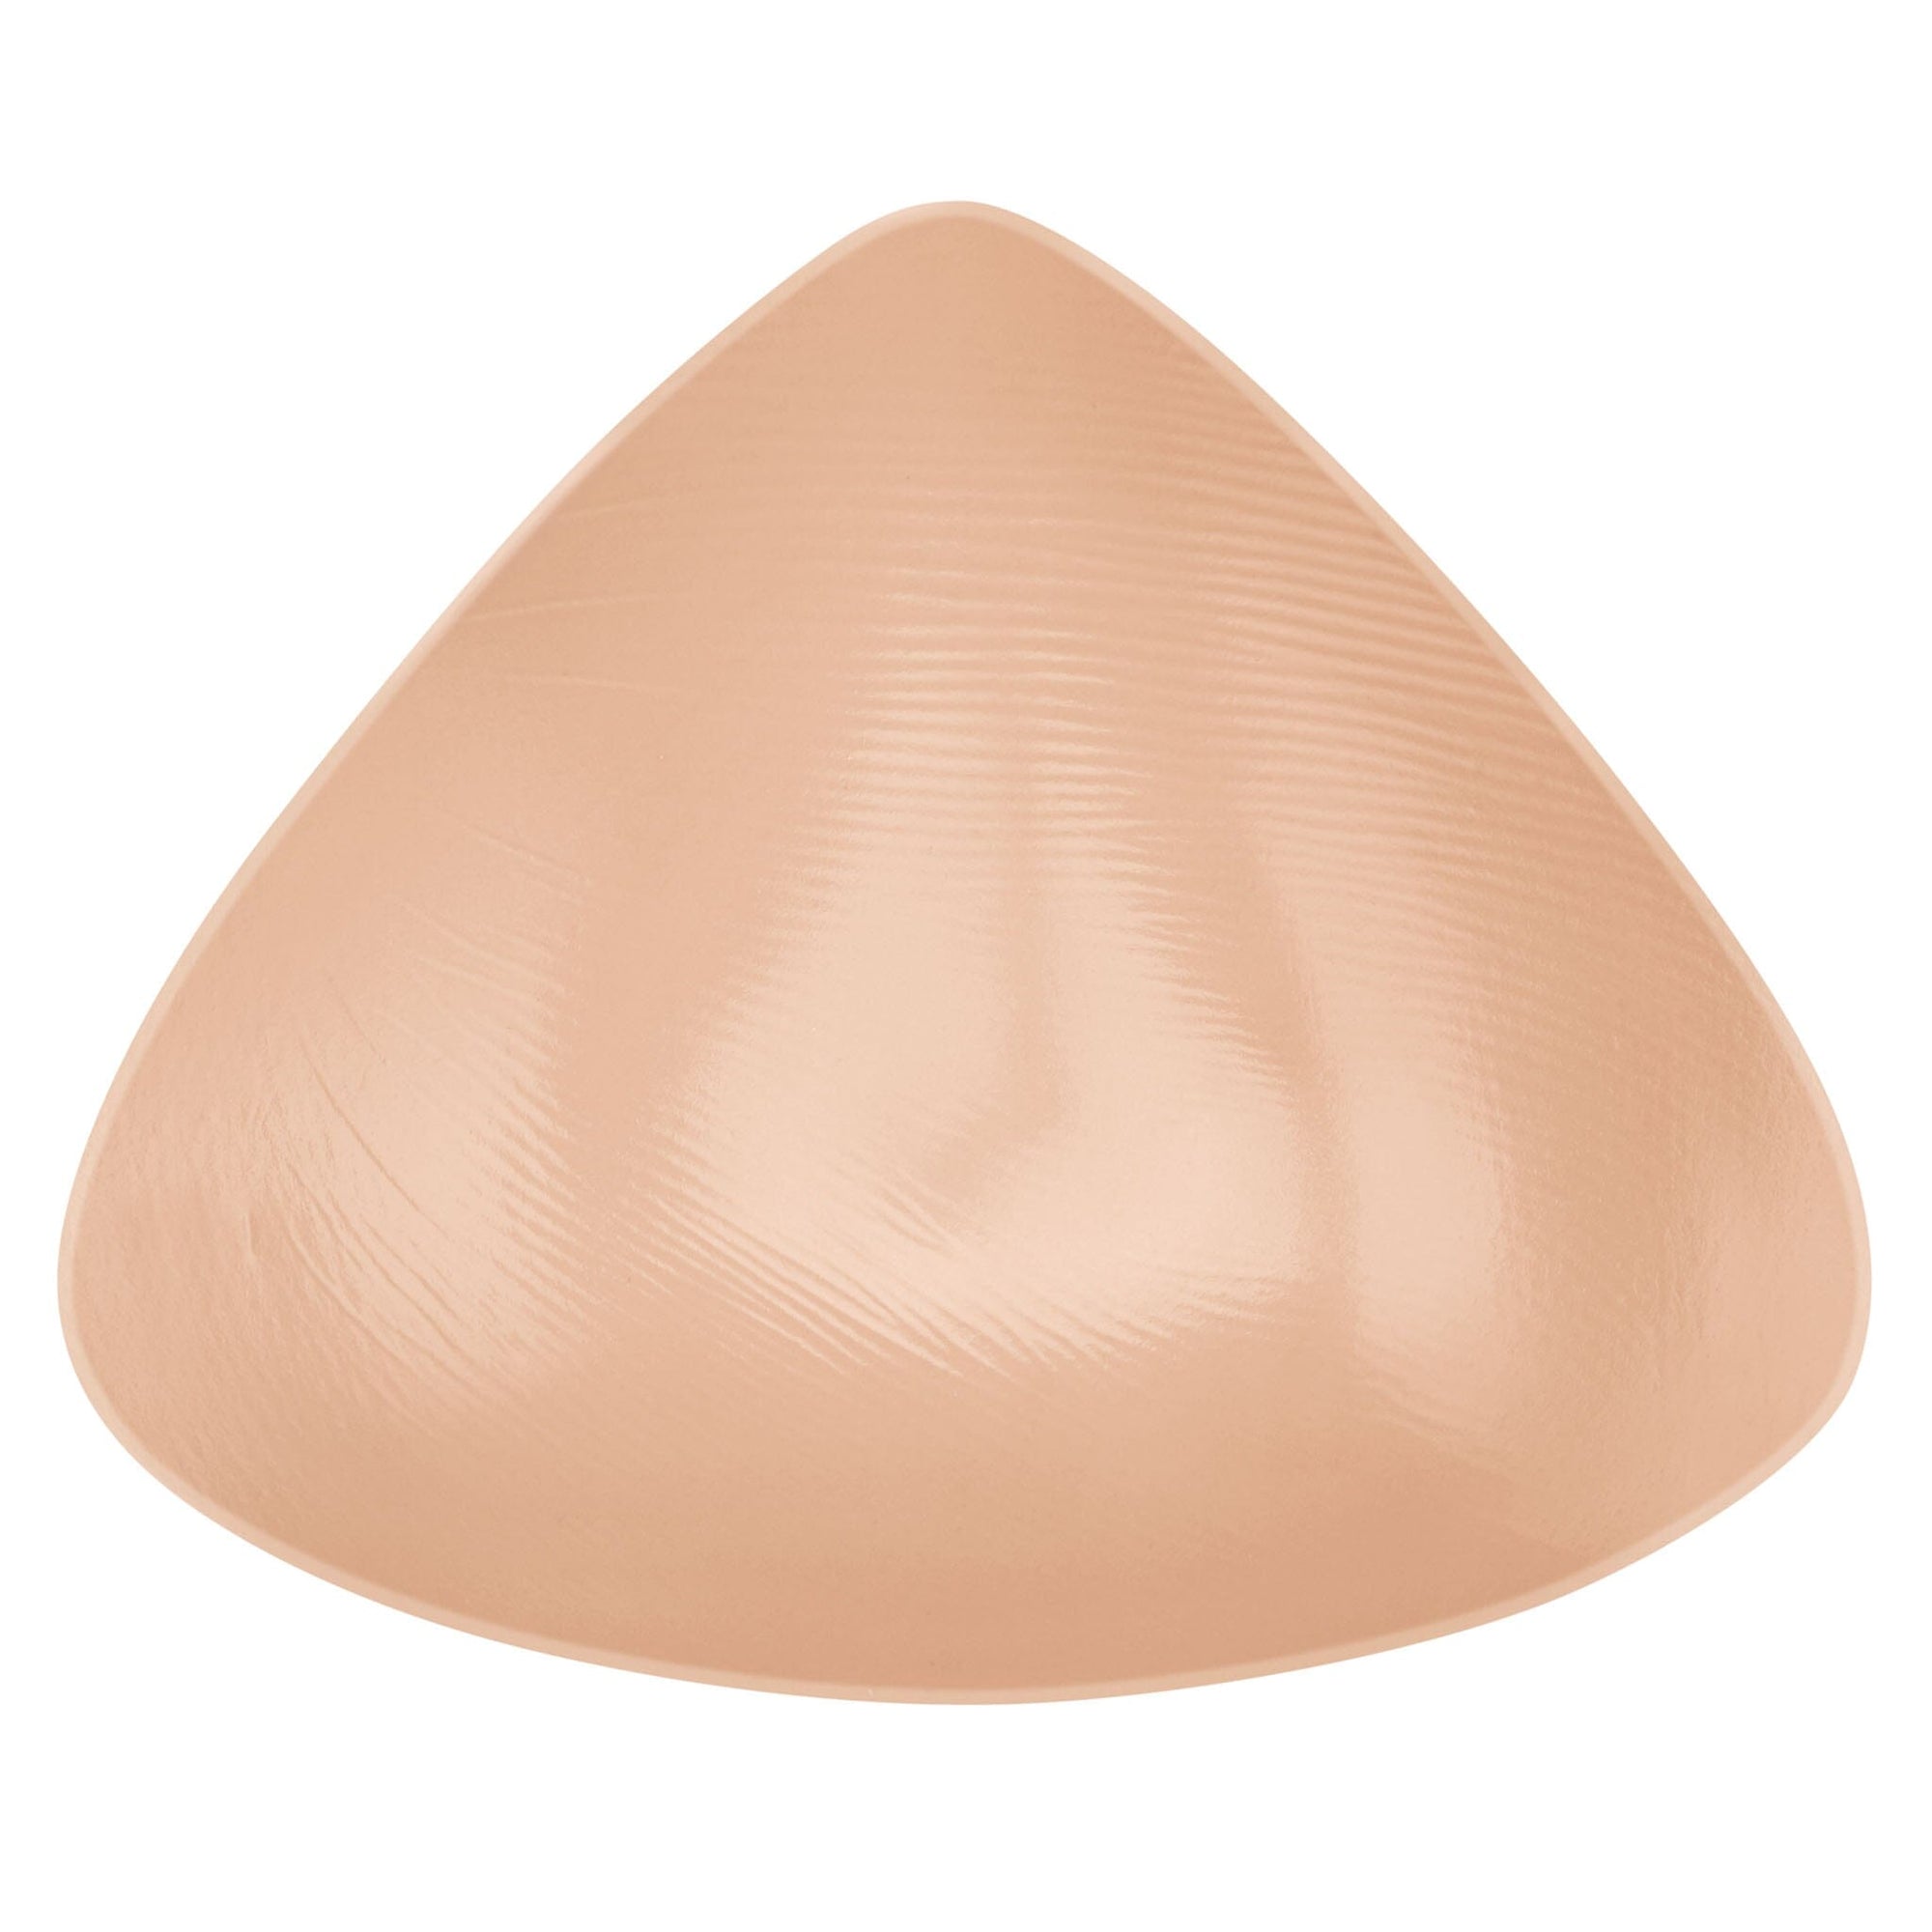 Essential Light Breast Form, shown in Tawny, front view.